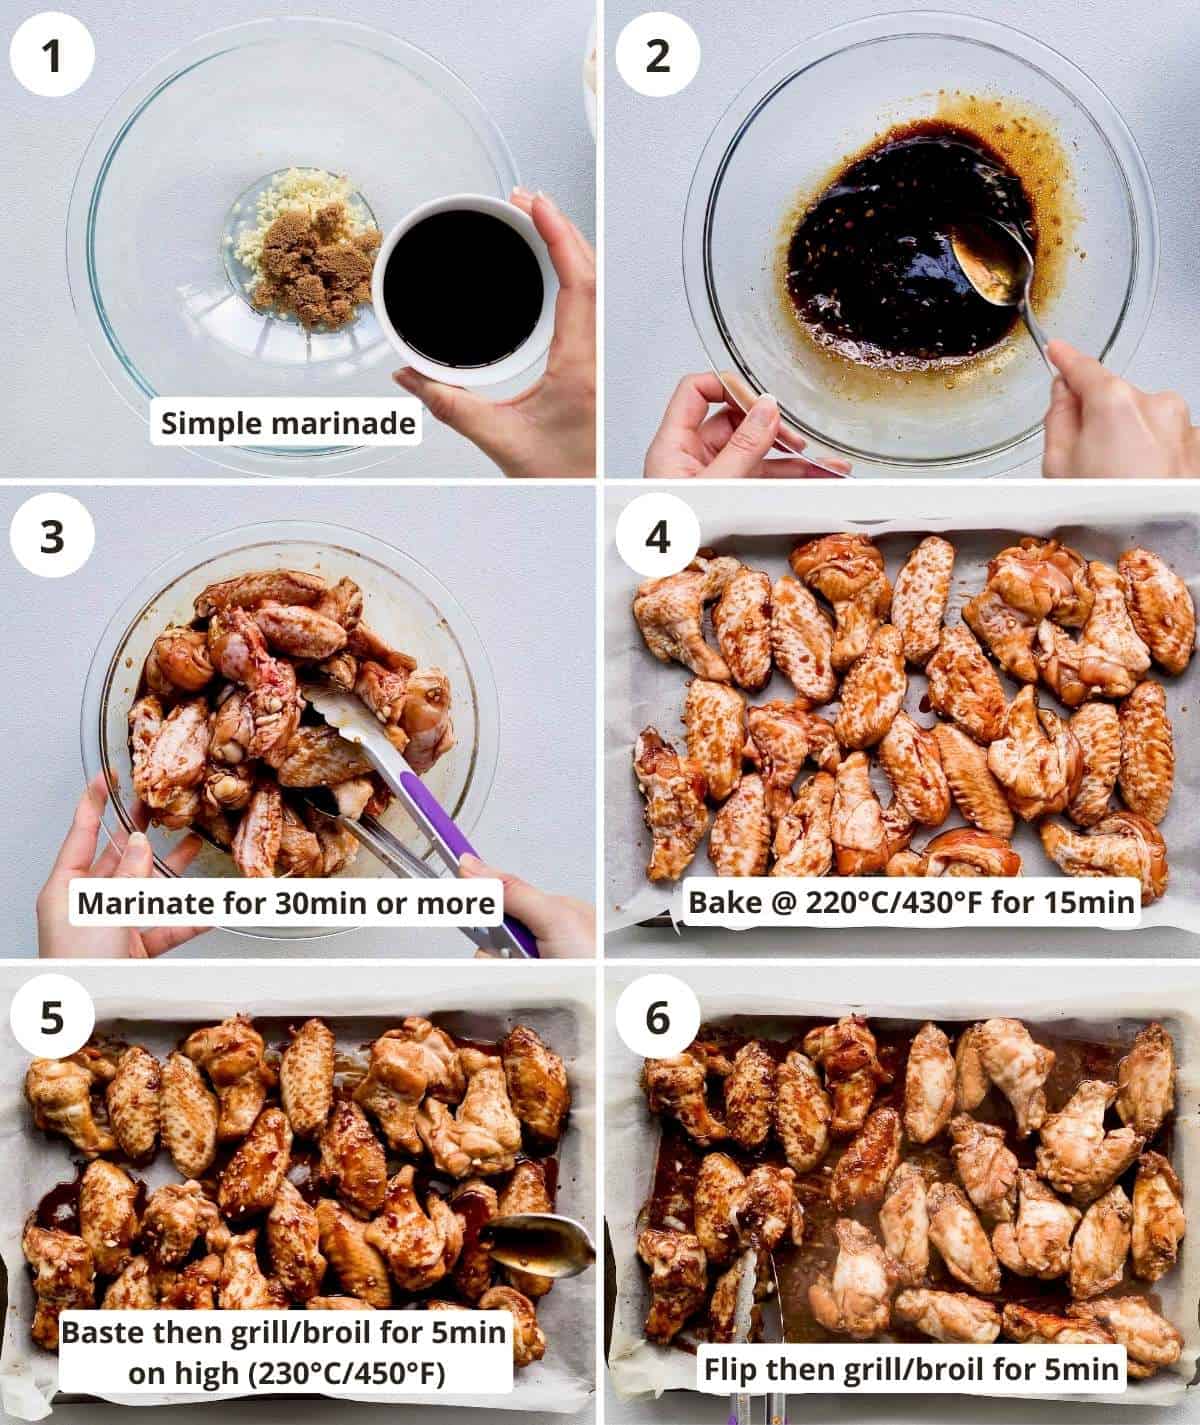 6 pictorial step by step instructions to make this recipe